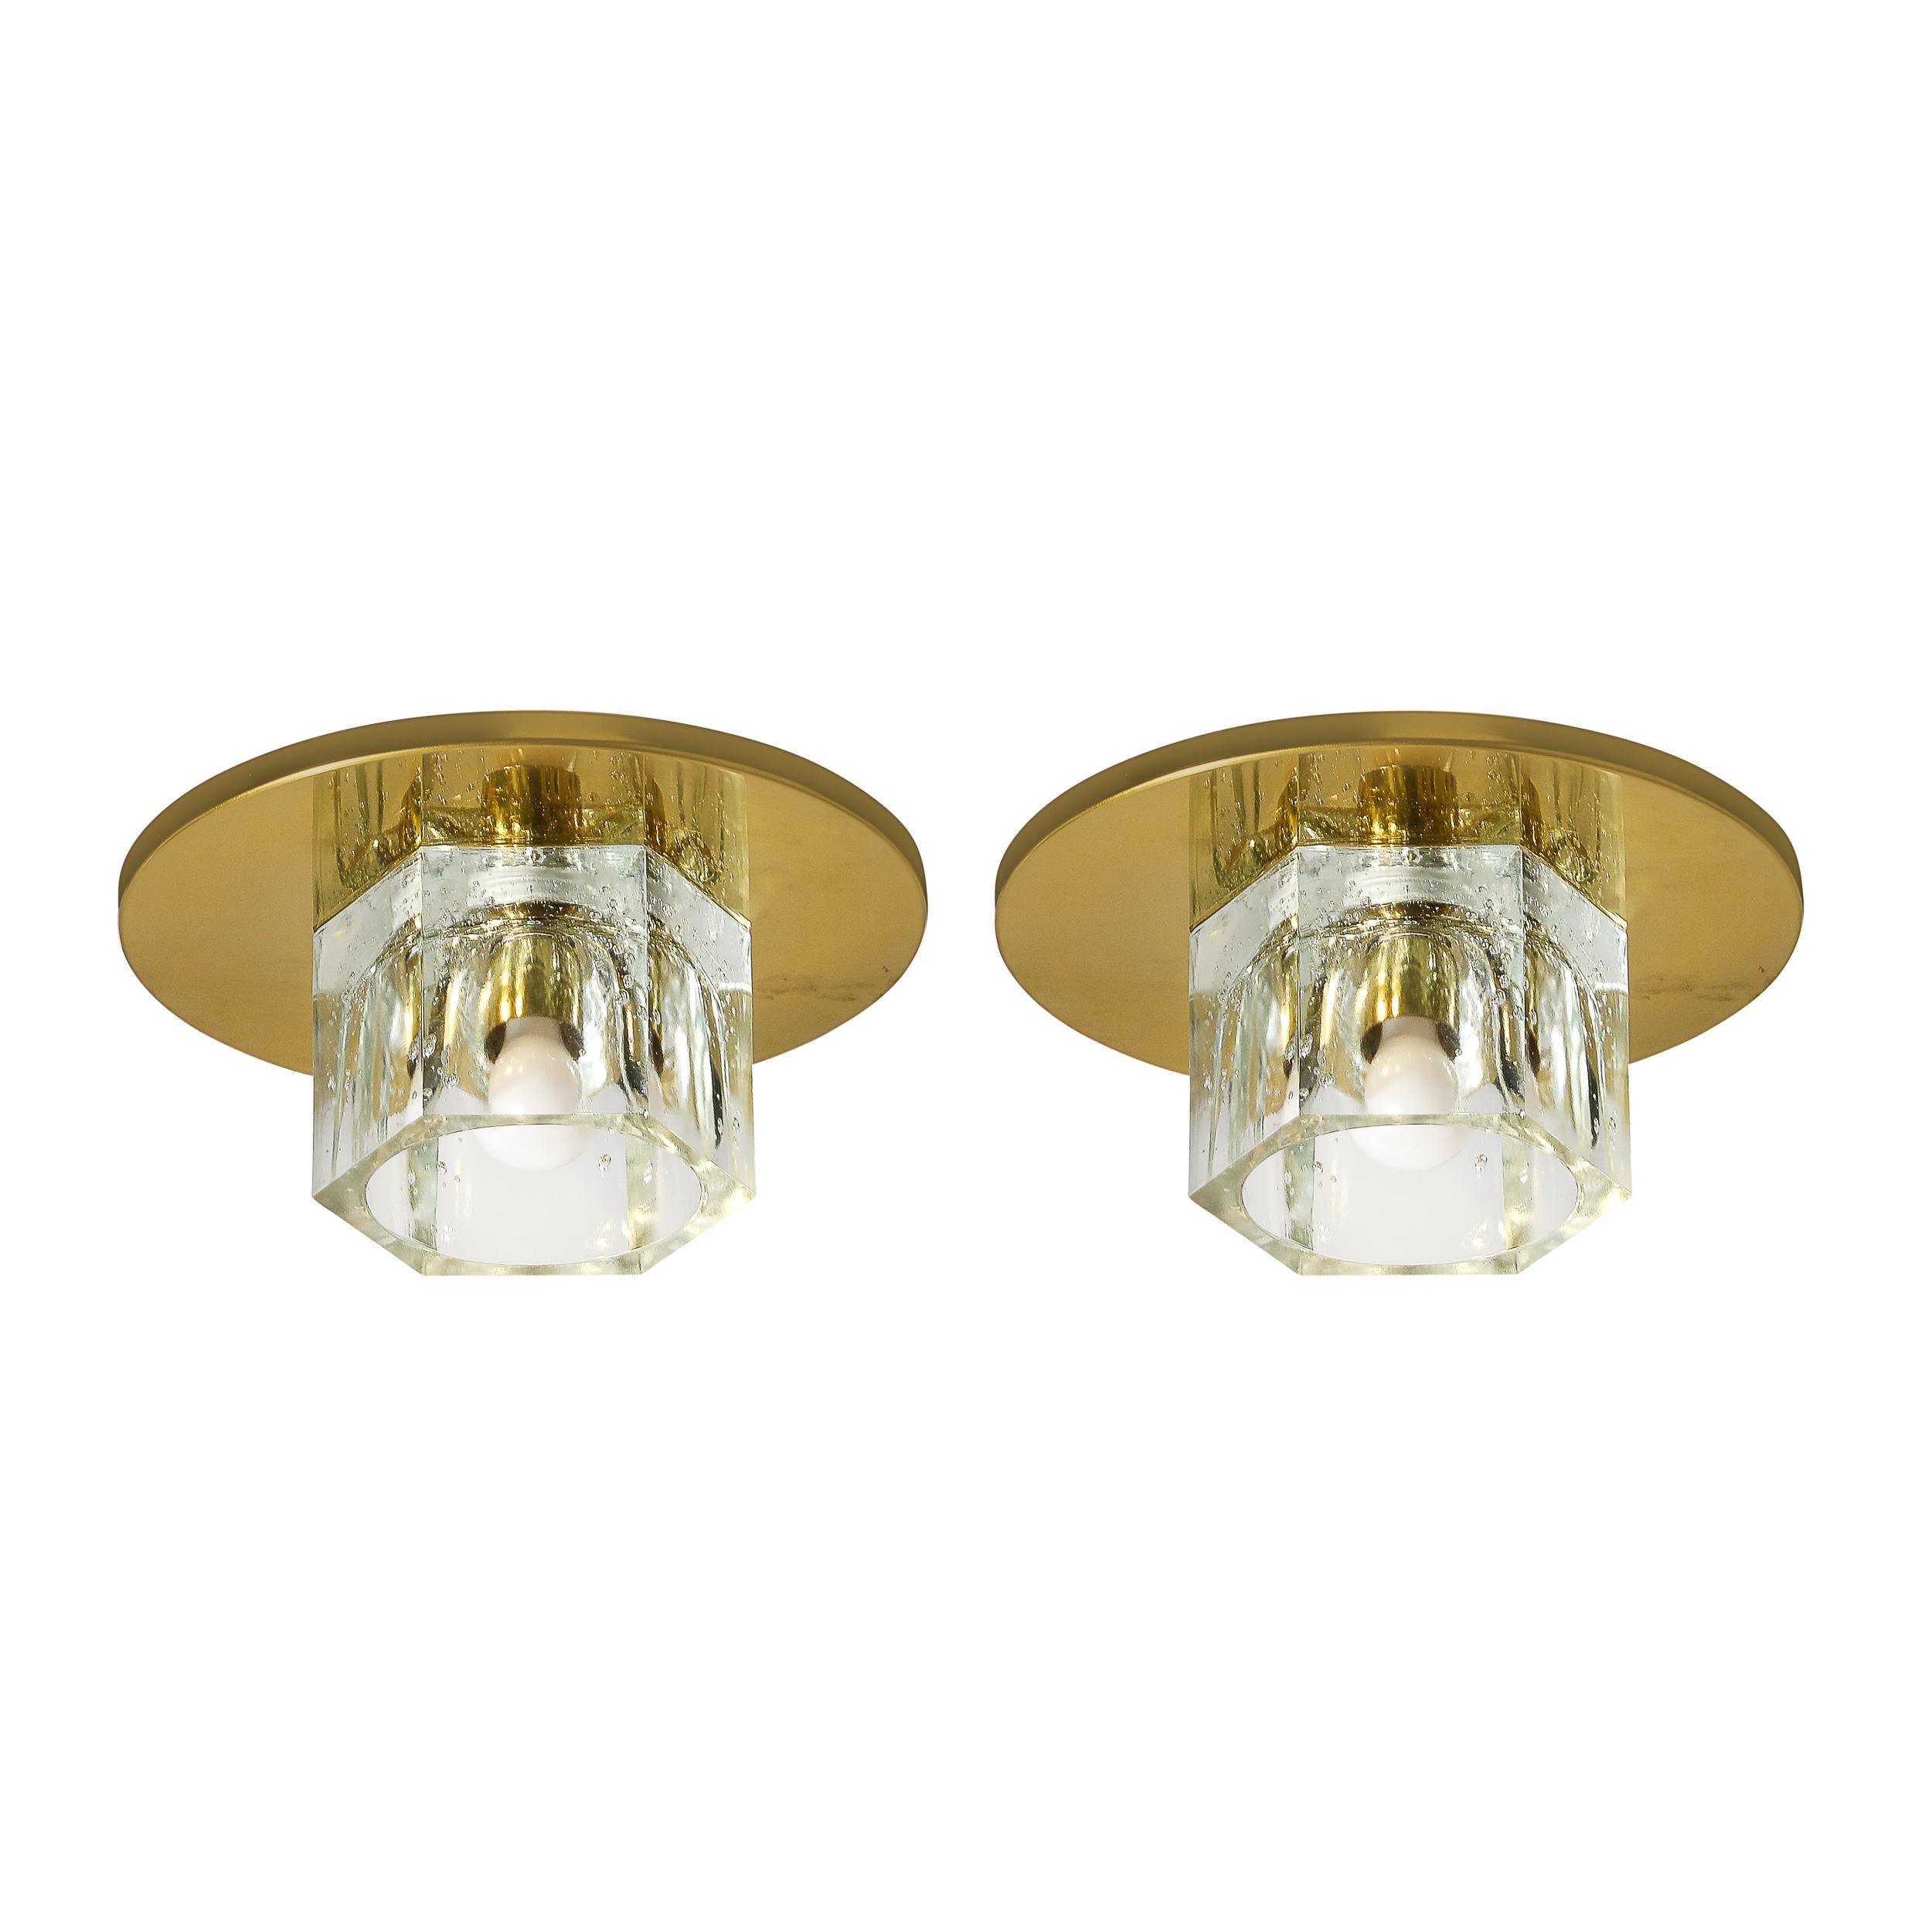 

This lovely Pair of Mid-Century Modernist Hexagonal Shade Glass Flush Mount Chandeliers W/Brass Fittings is by Lightolier and originates from the United States, Circa 1970. Features a hexagonal glass shade which house and diffuse the light of the